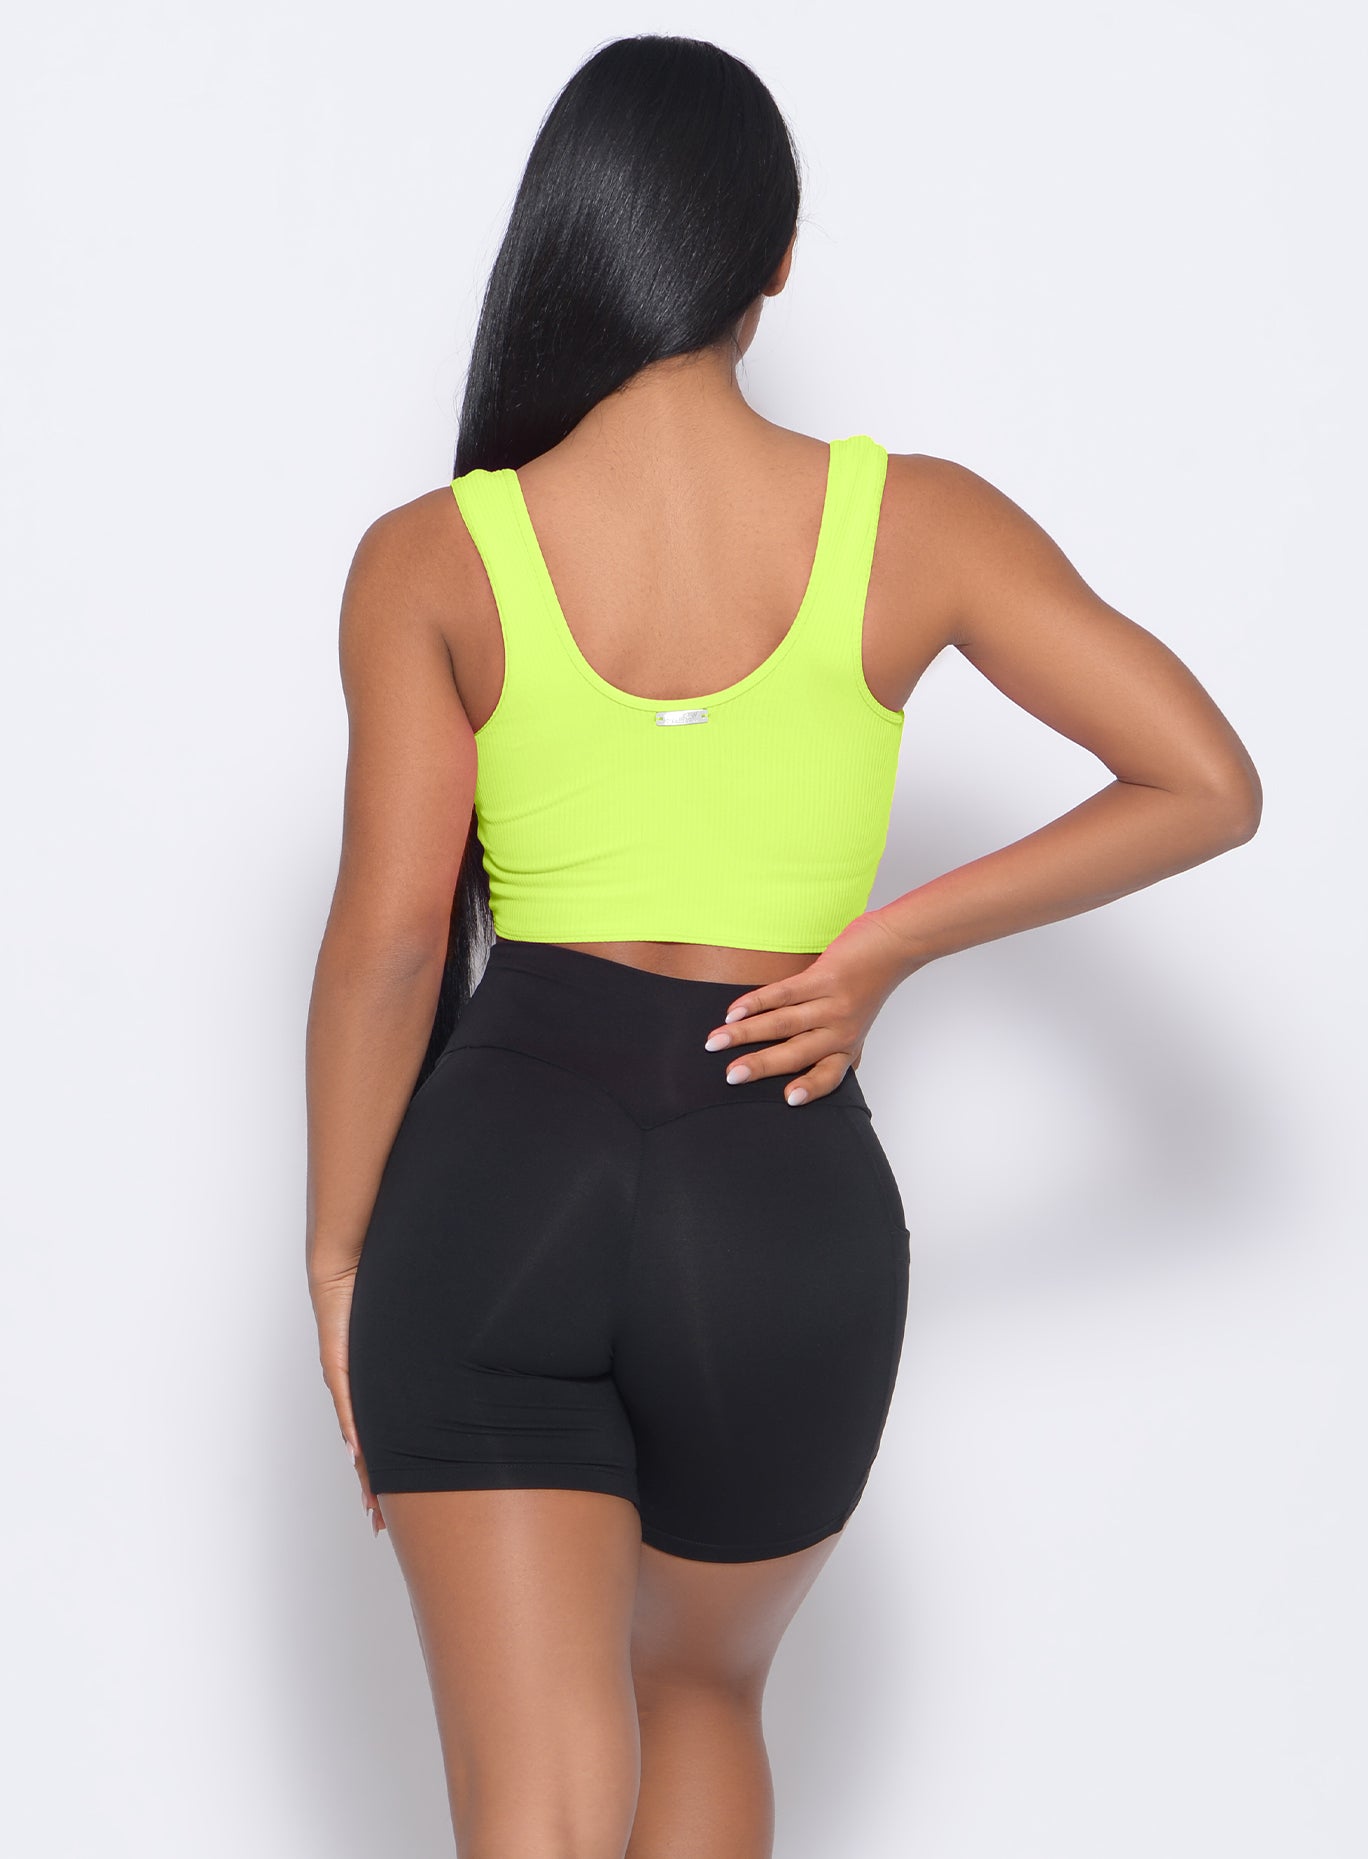 Back profile view of the model in our henley sports bra in neon yellow and a black shorts